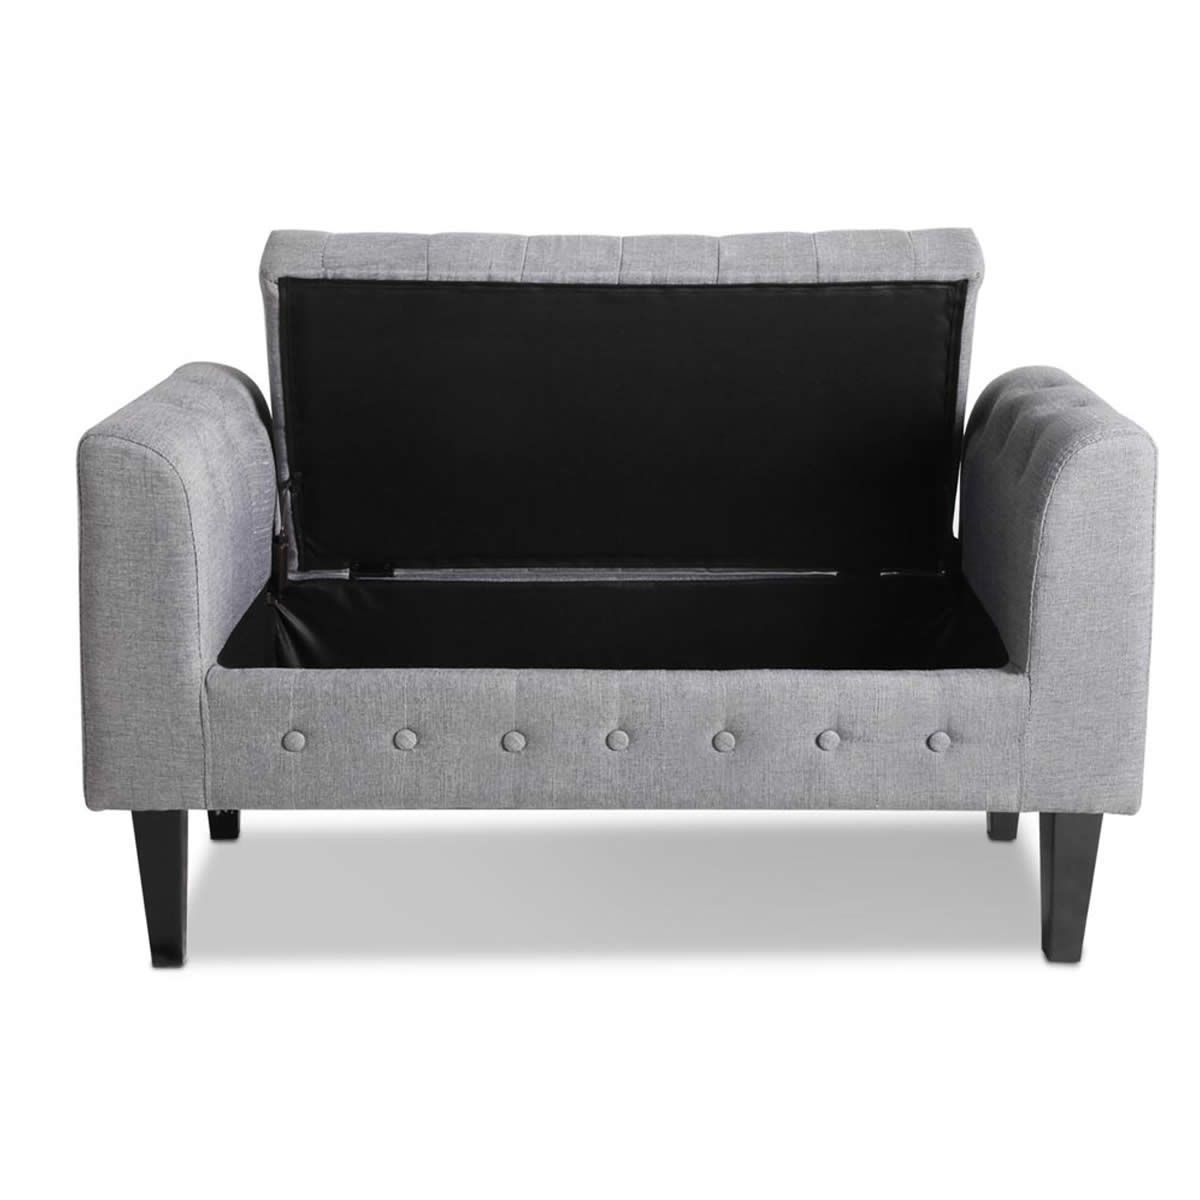 Multi Functional Linen Fabric Tufted Storage Ottoman Bench With Regarding Multi Color Fabric Storage Ottomans (View 5 of 20)